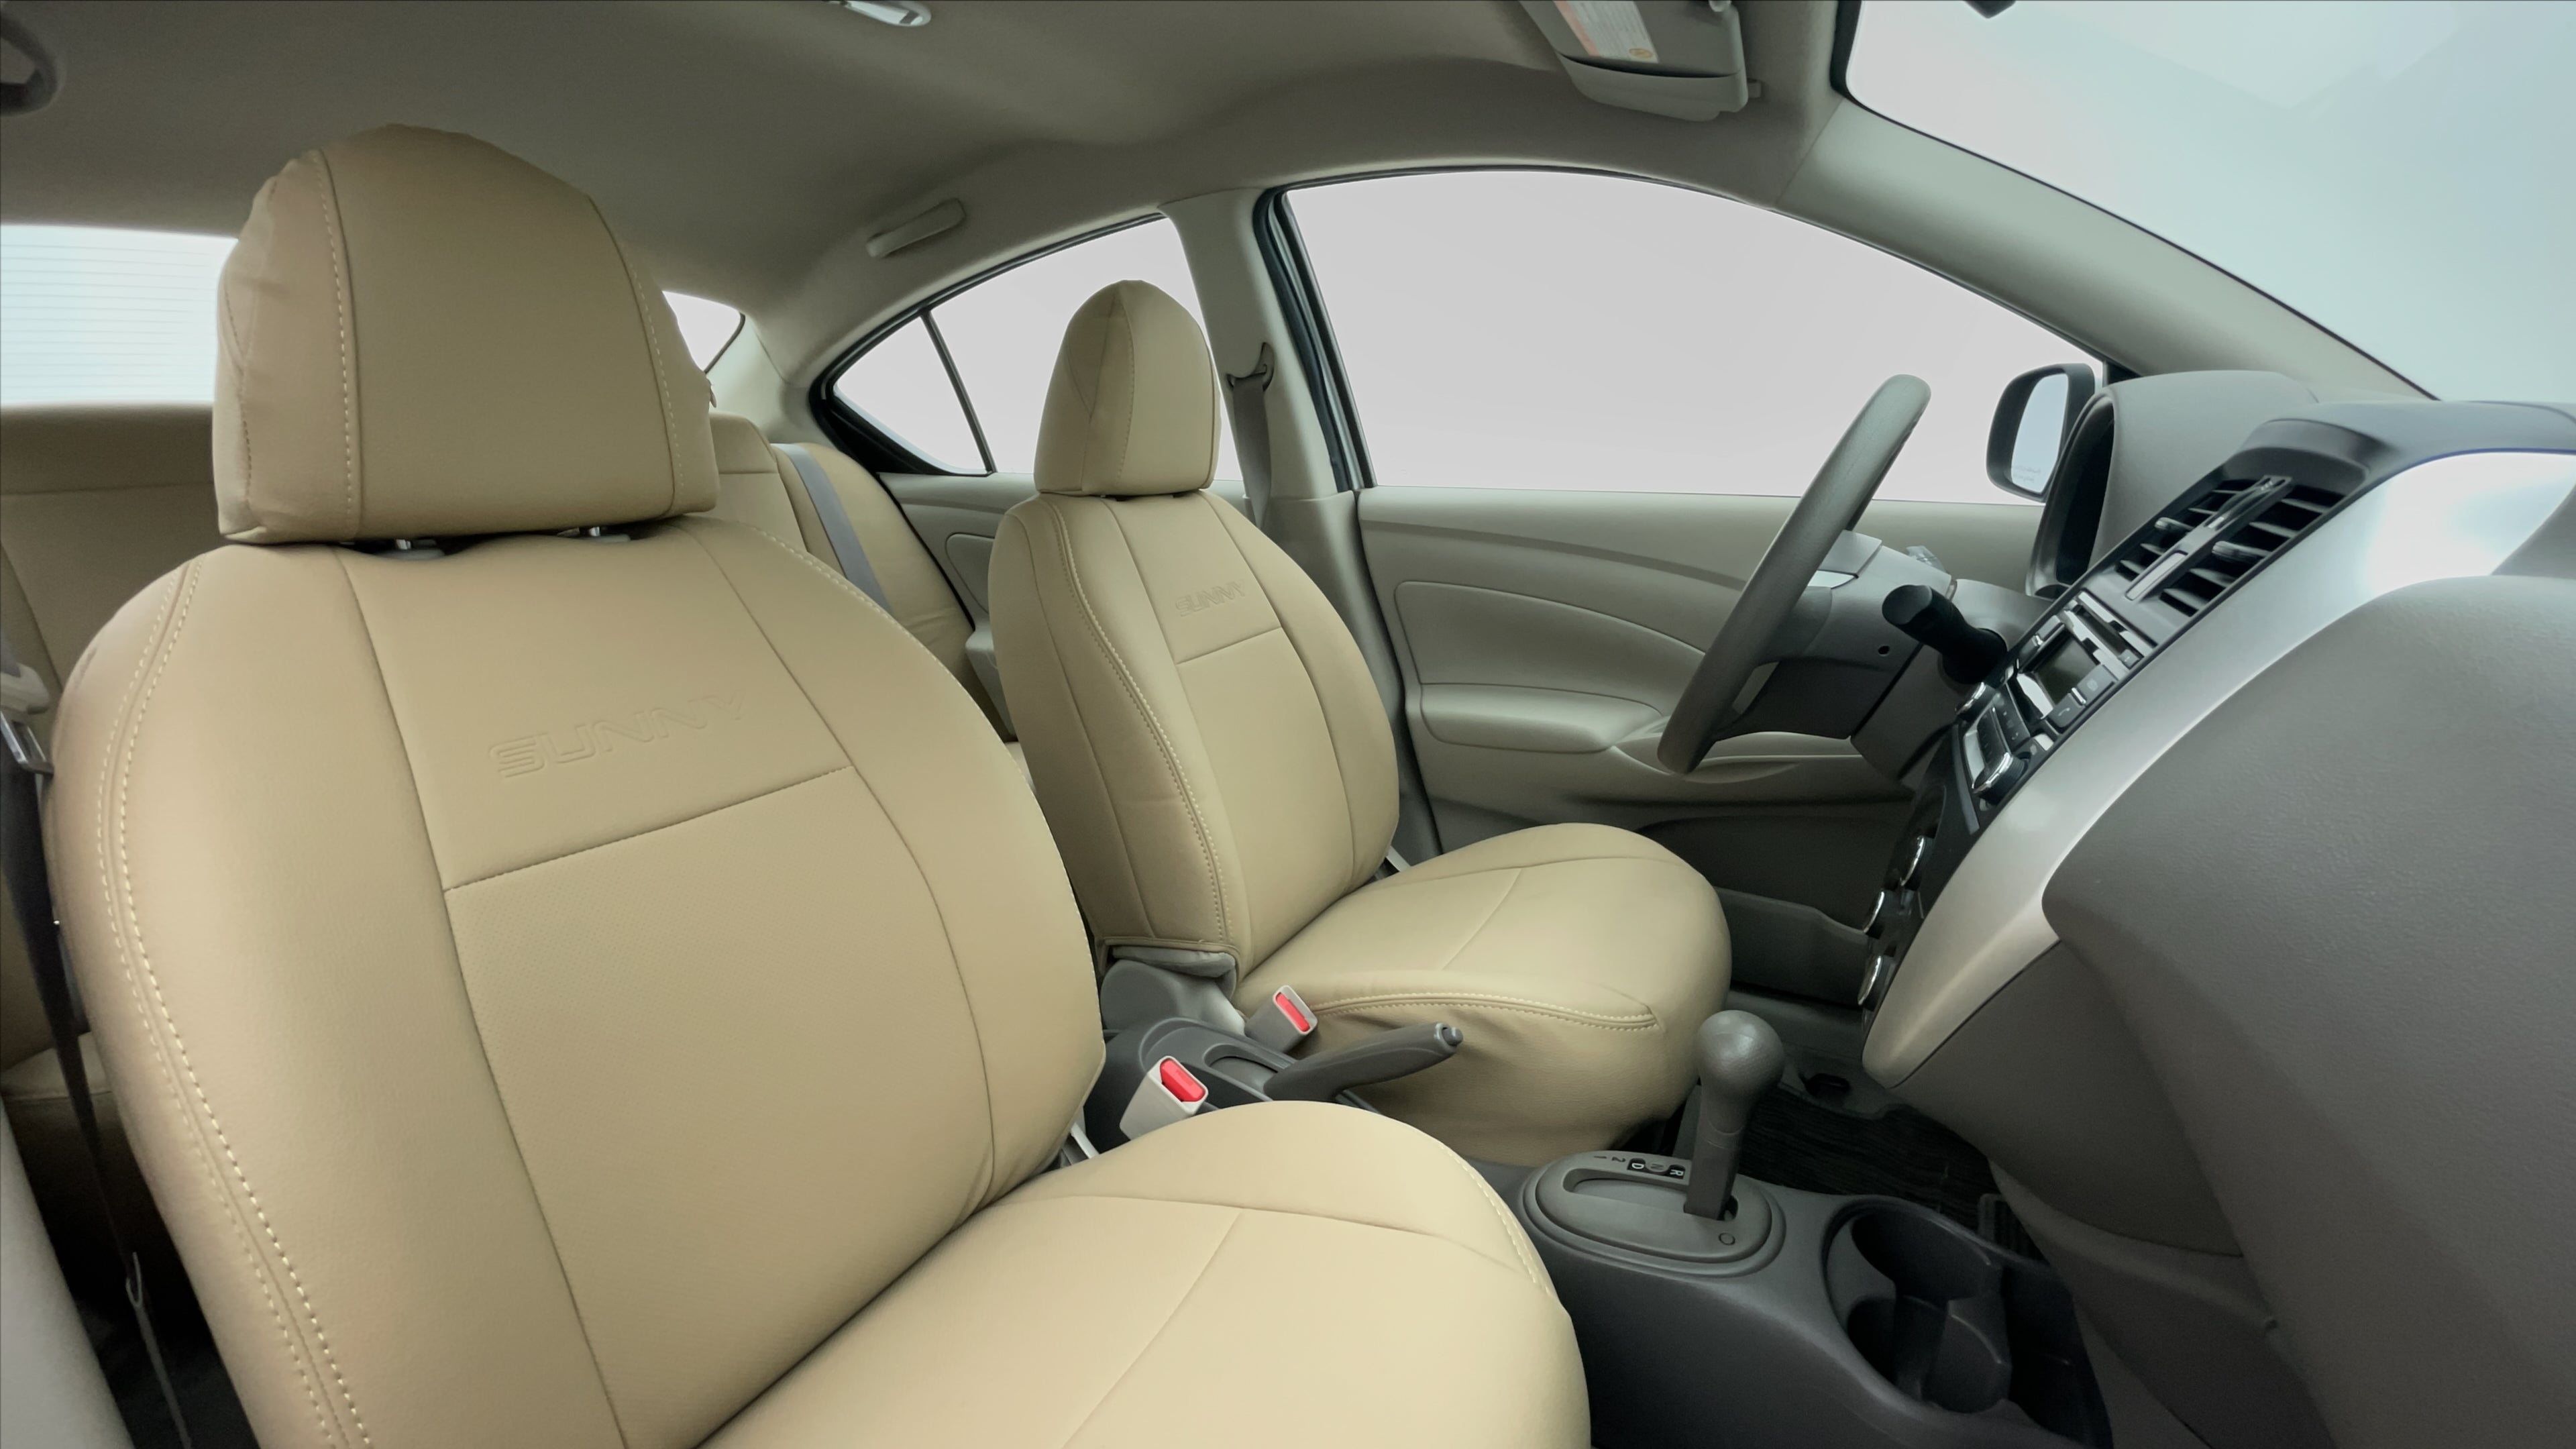 Nissan Sunny-Right Side Front Door Cabin View